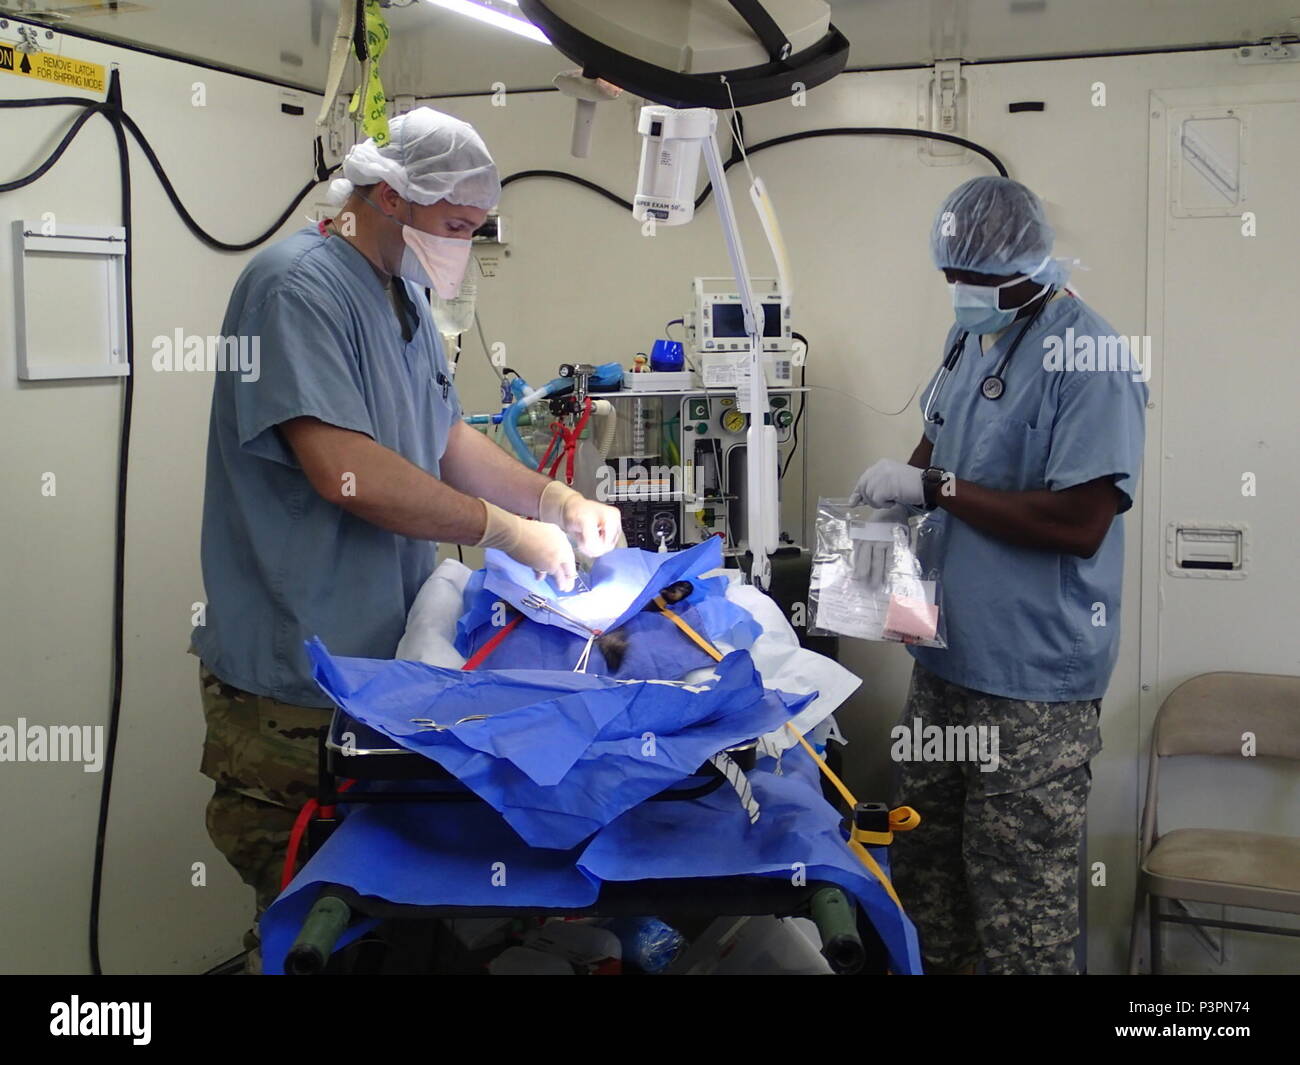 Capt. Matthew Watson, a veterinarian, and Spc. Omokorede Fatile, a food inspector, both from the 422nd Medical Detachment Veterinary Services out of Rockville, Md.,  perform a neuter procedure on a cat during Greater Chenango Cares, July 20, 2016.  Greater Chenango Cares is one of the Innovative Readiness Training events which provides real-world training in a joint civil-military environment while delivering world class medical care to the people of Chenango County, N.Y., from July 15-24. Stock Photo